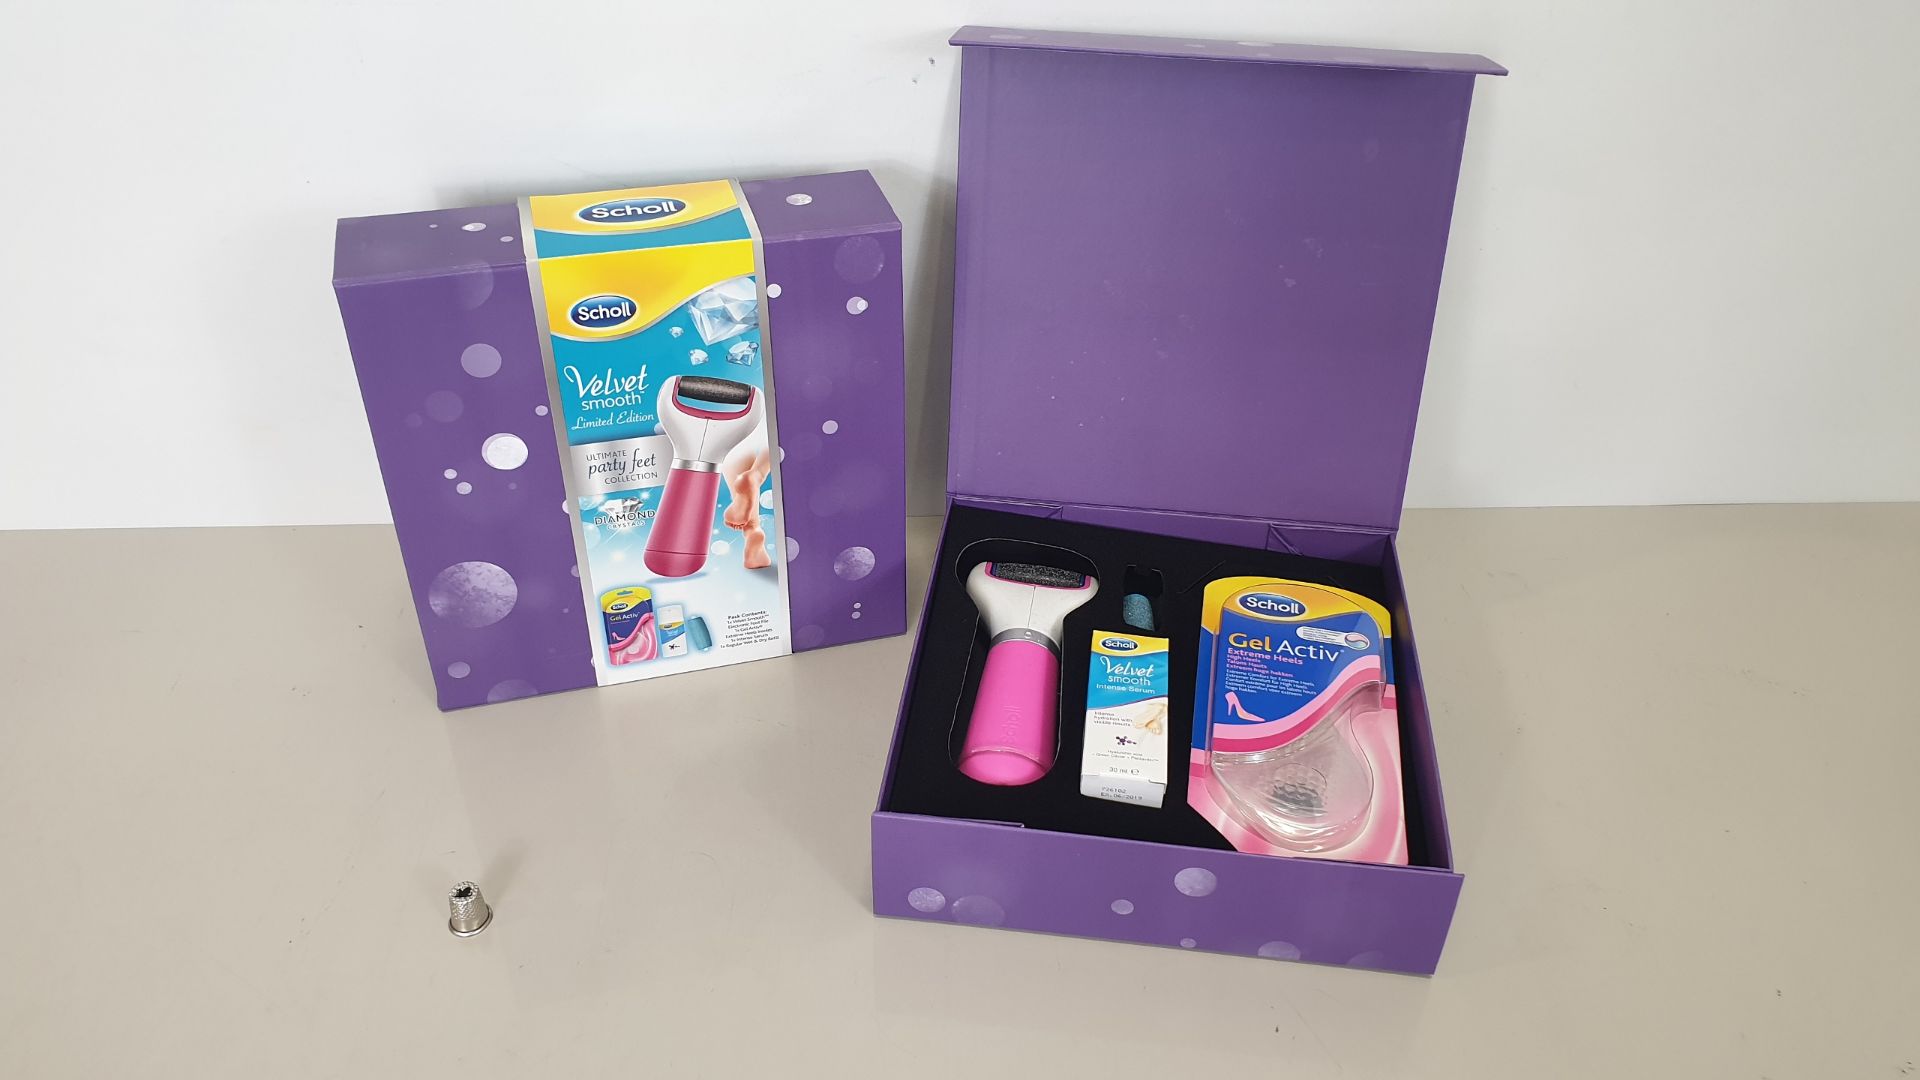 12 X BRAND NEW SCHOLL VELVET SMOOTH LIMITED EDITION ULTIMATE PARTY FEET COLLECTION - SERUM EXPIRY